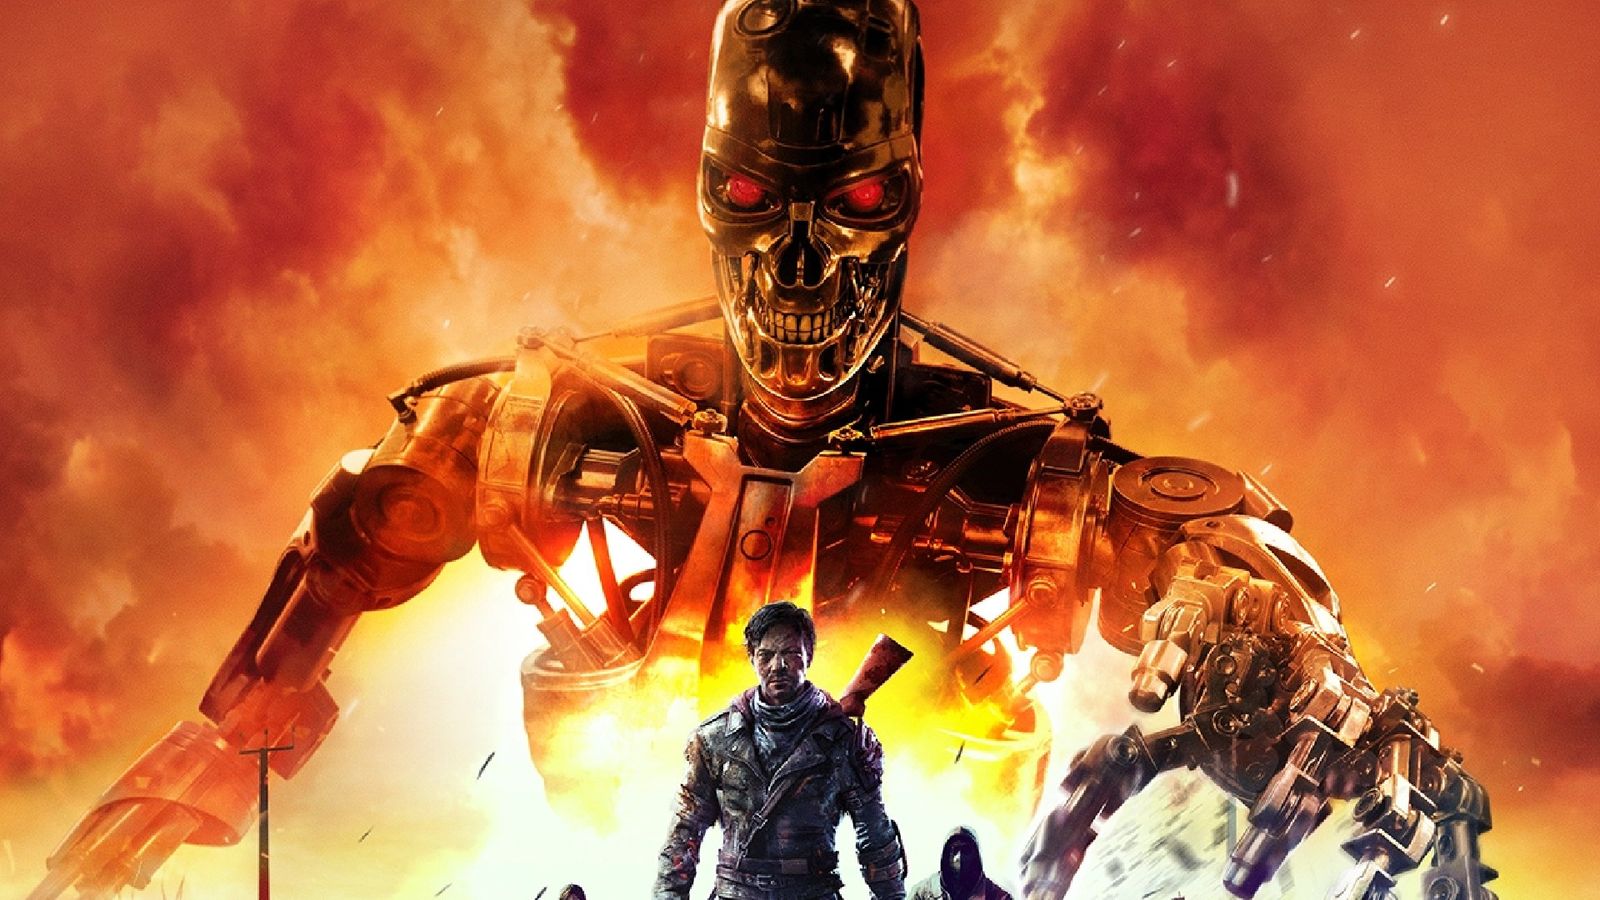 Terminator robot on fire above a character in Terminator Survivors key art